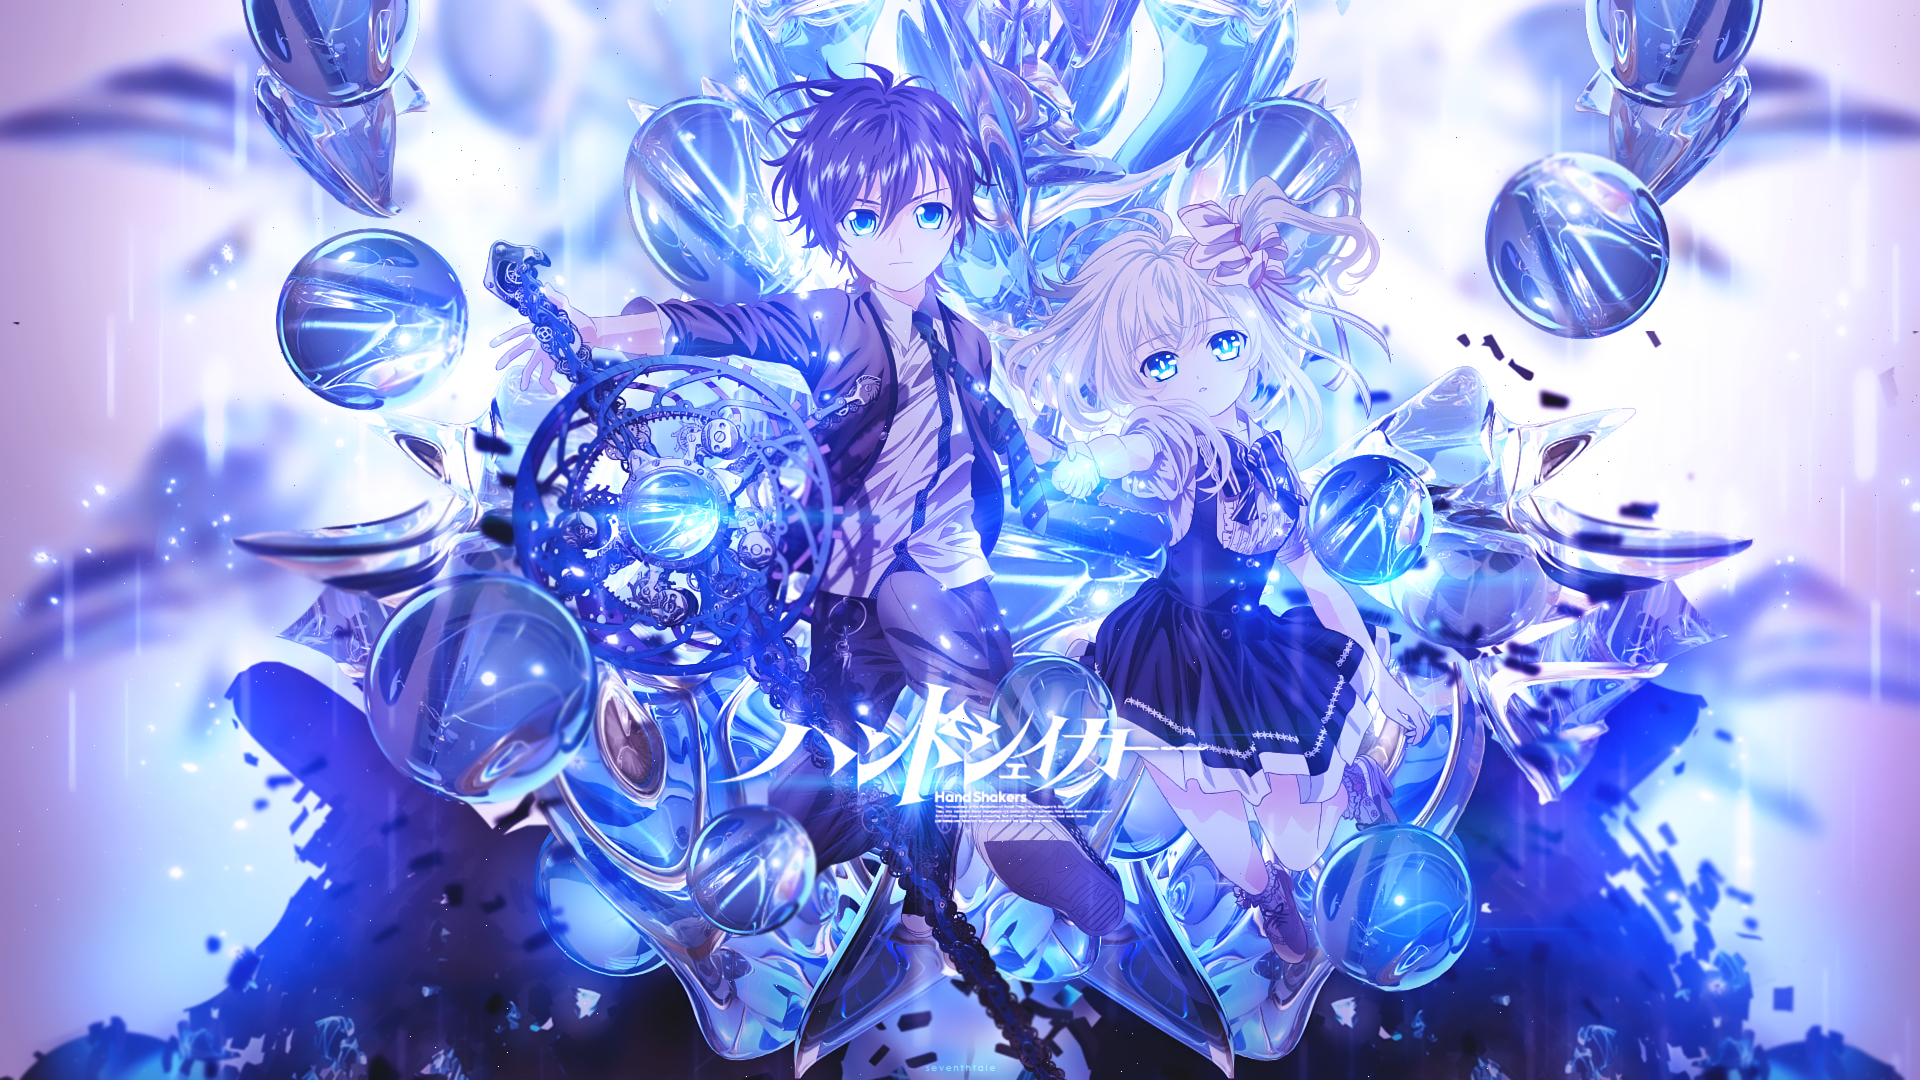 Hand Shakers Wallpapers